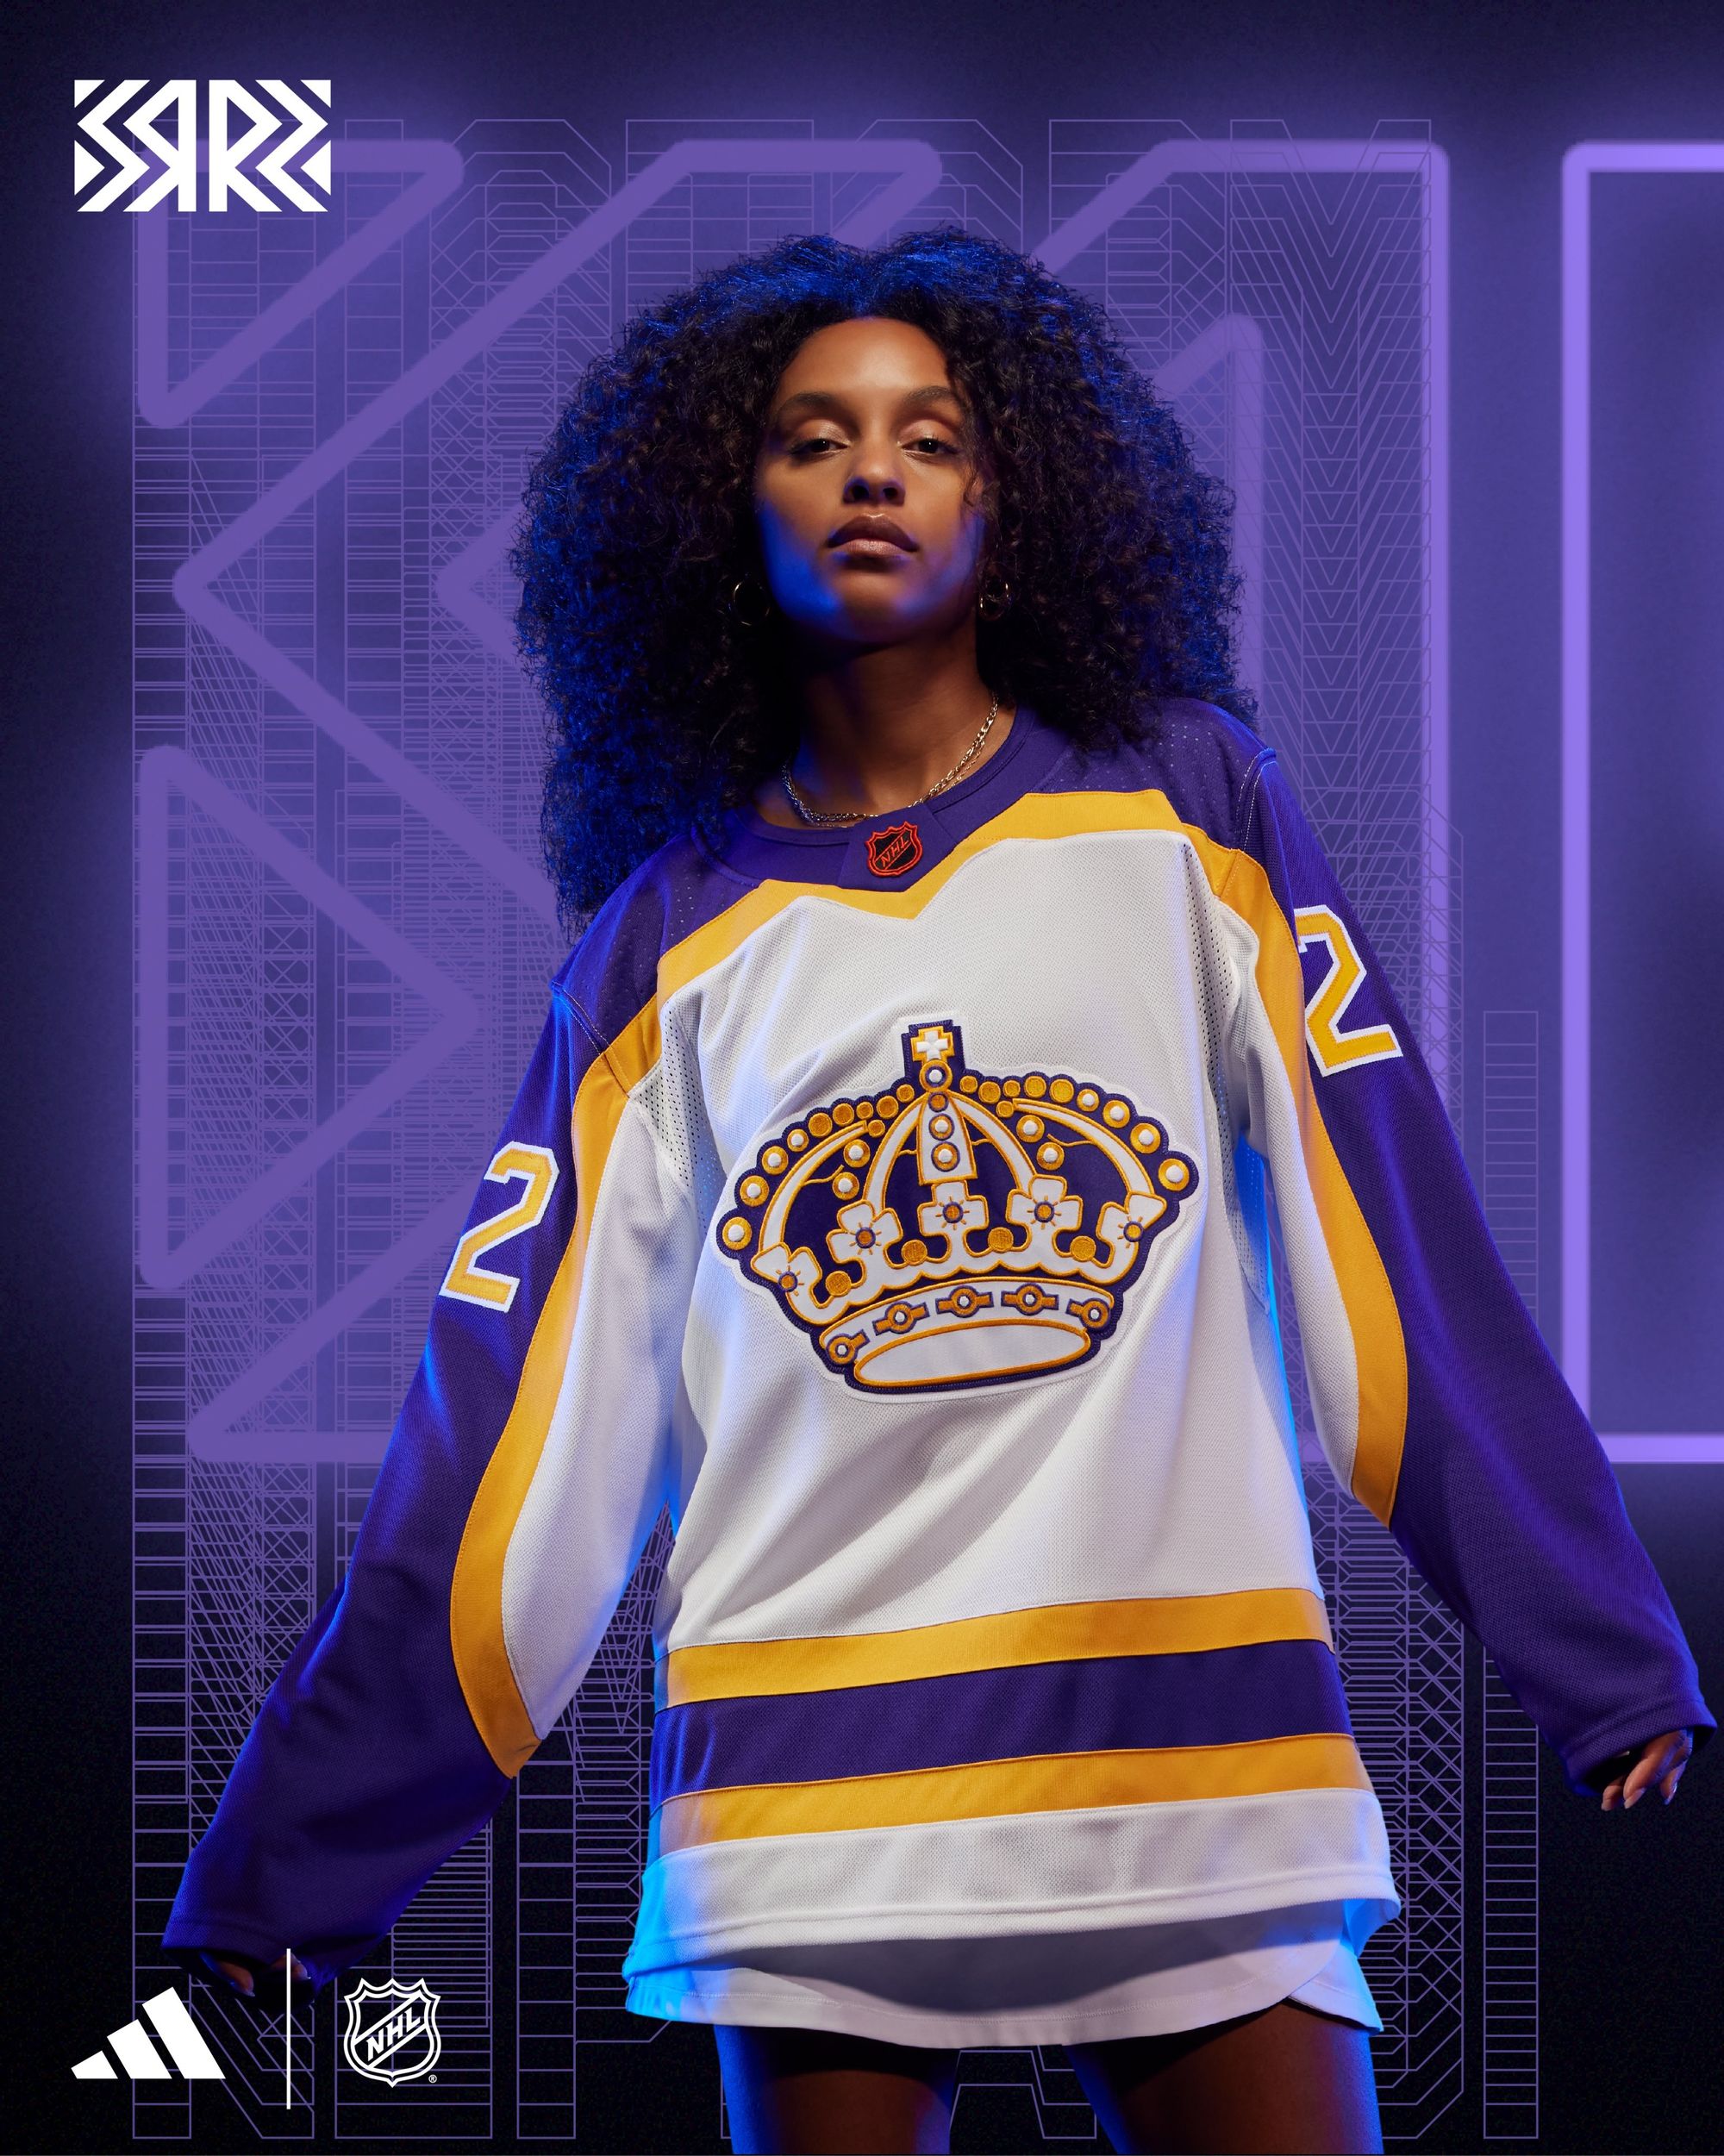 NHL on X: Puttin' it in reverse tonight for the @LAKings' #ReverseRetro  game! 😍 The Kings honor the 1982 uniform celebrating the 40th Anniversary  of the Miracle on Manchester, where the Kings